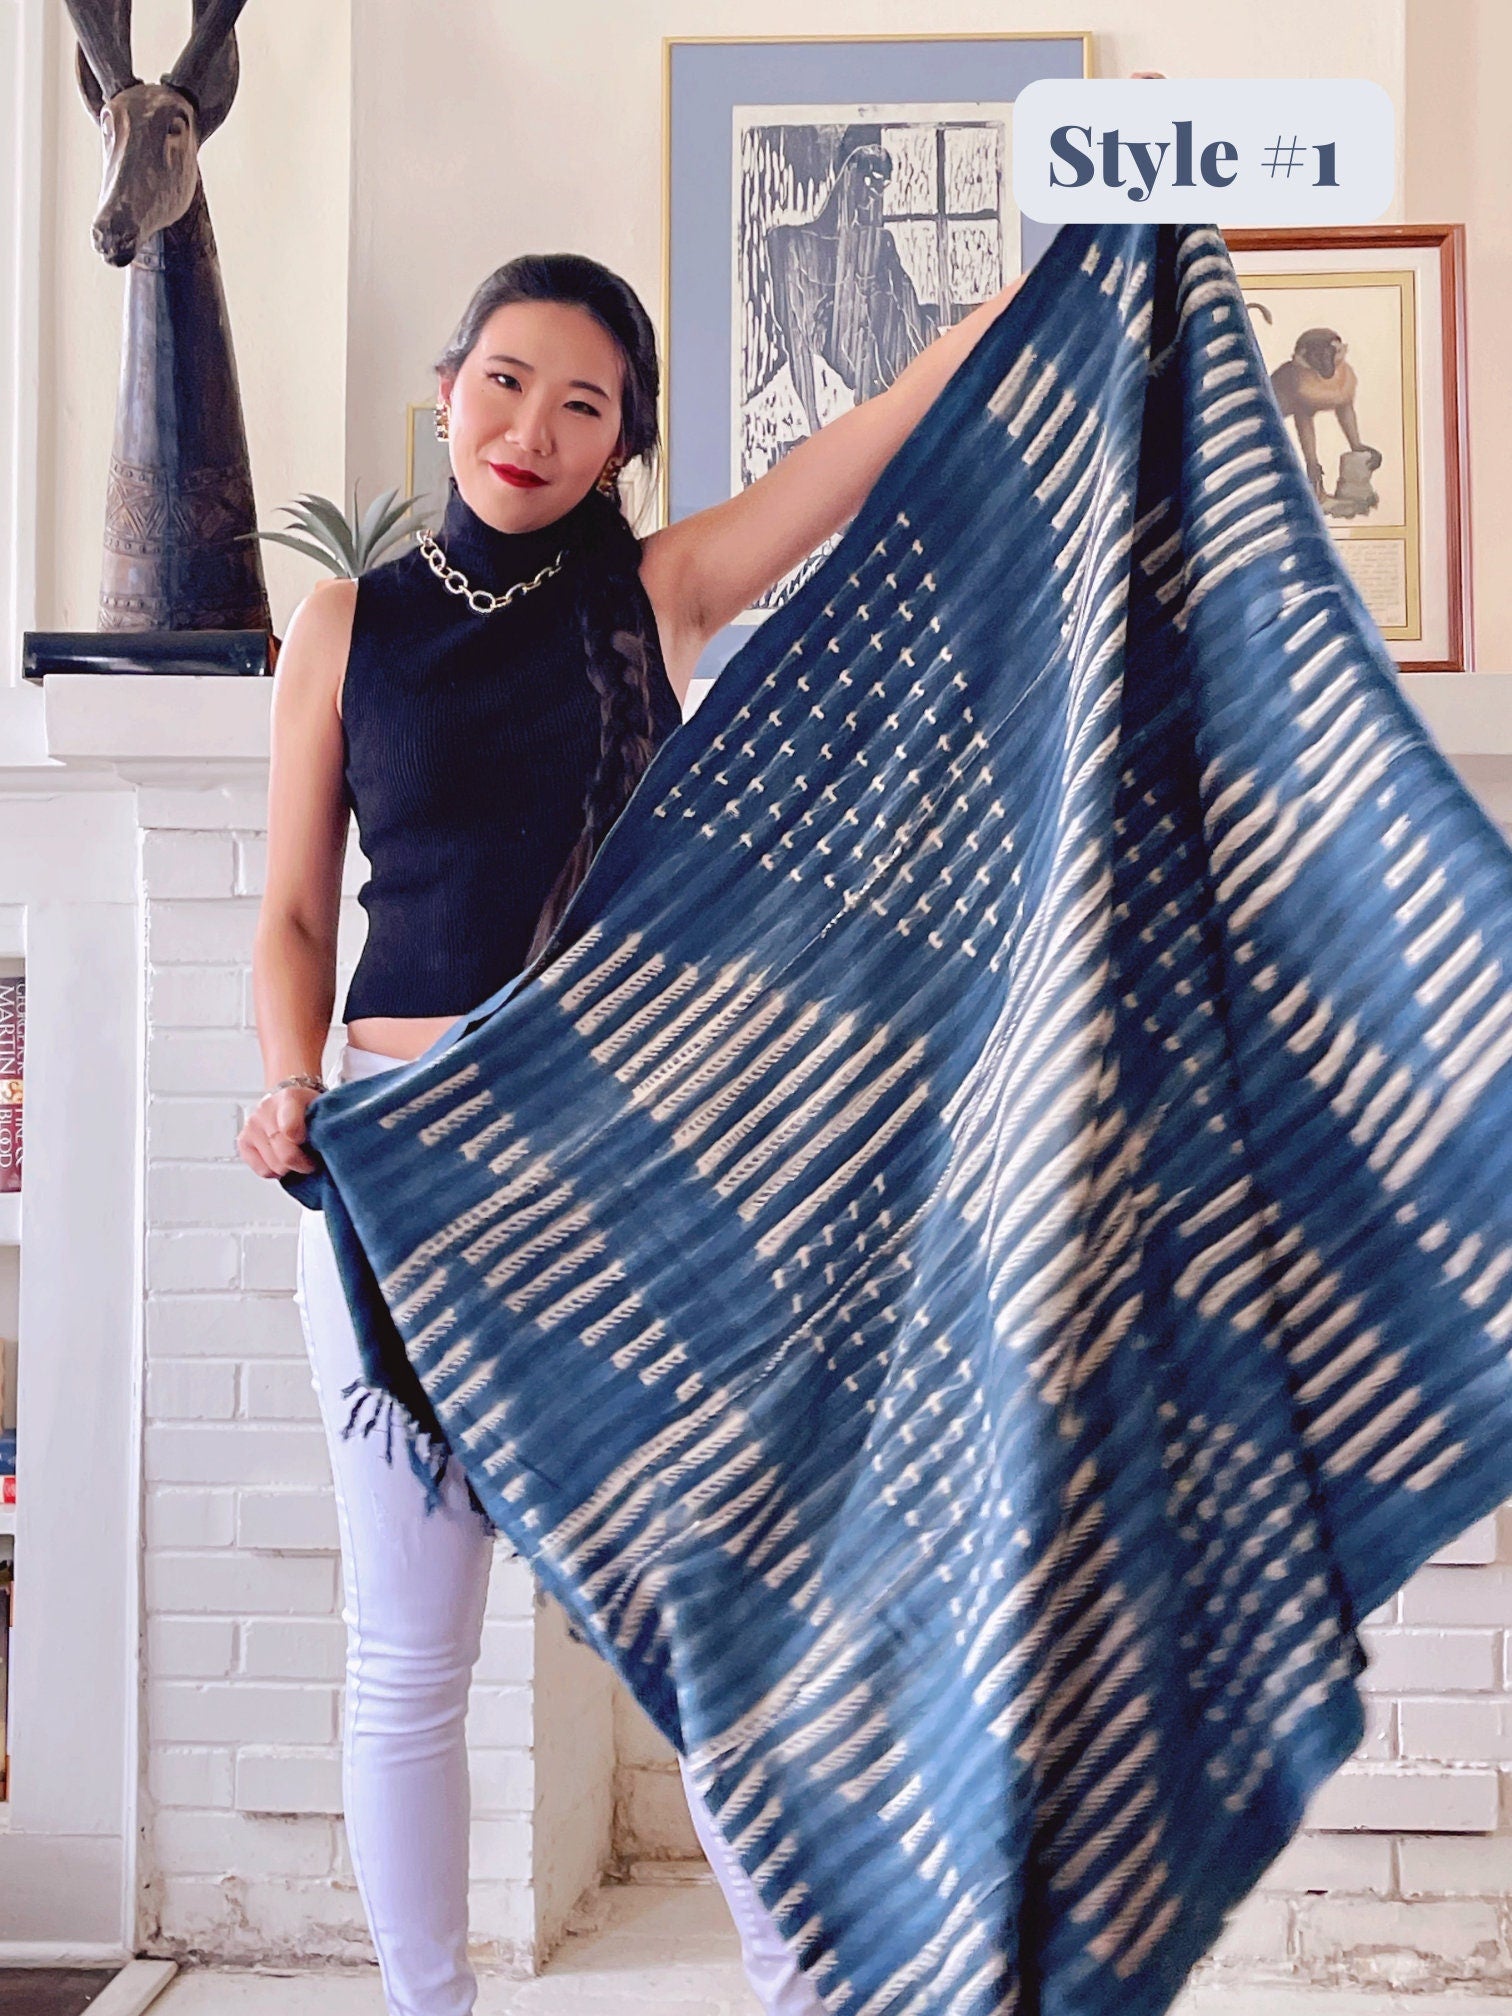 Vintage Indigo African Mud Cloth | Hand Woven Blue and White Patterned Throw Blanket | Light Woven Rug | Boho Chic Wall Tapestry Textile